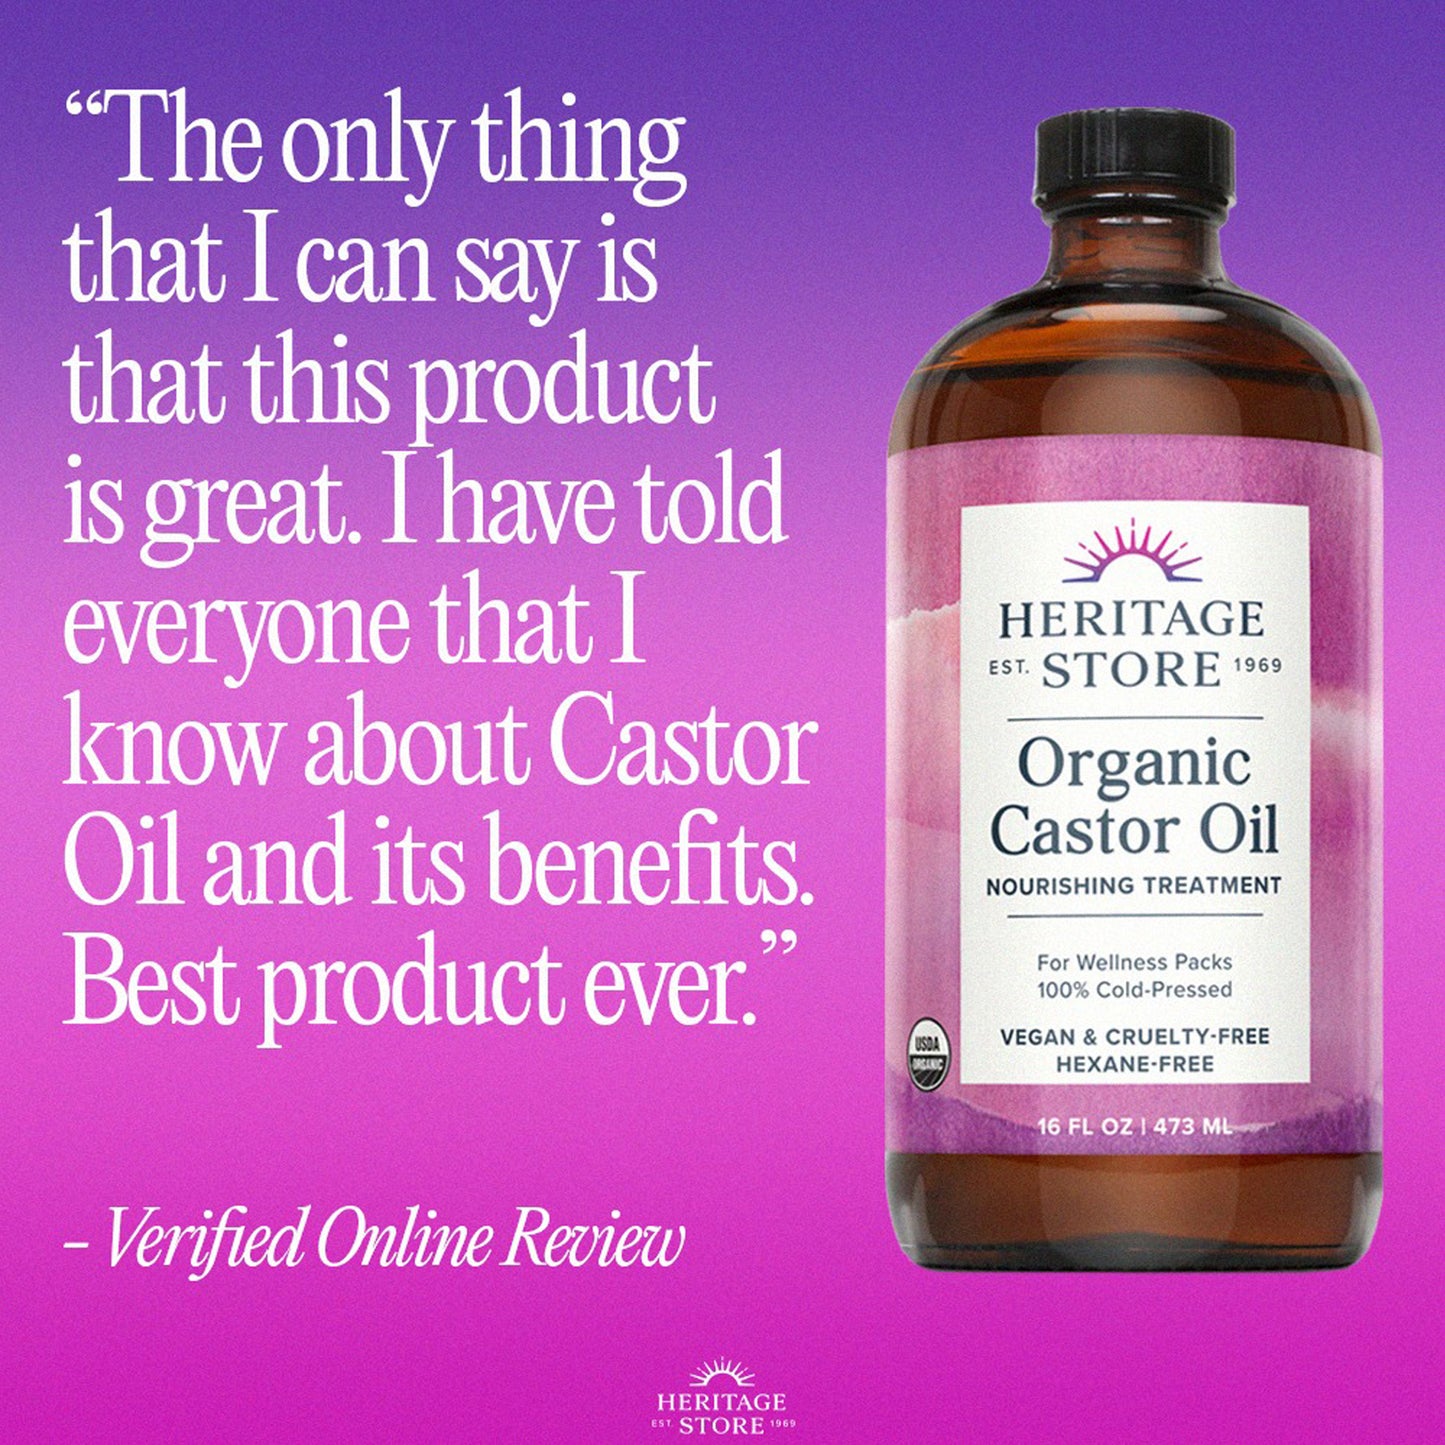 Heritage Store Organic Castor Oil Cold Pressed Hexane Free 480 mL Review